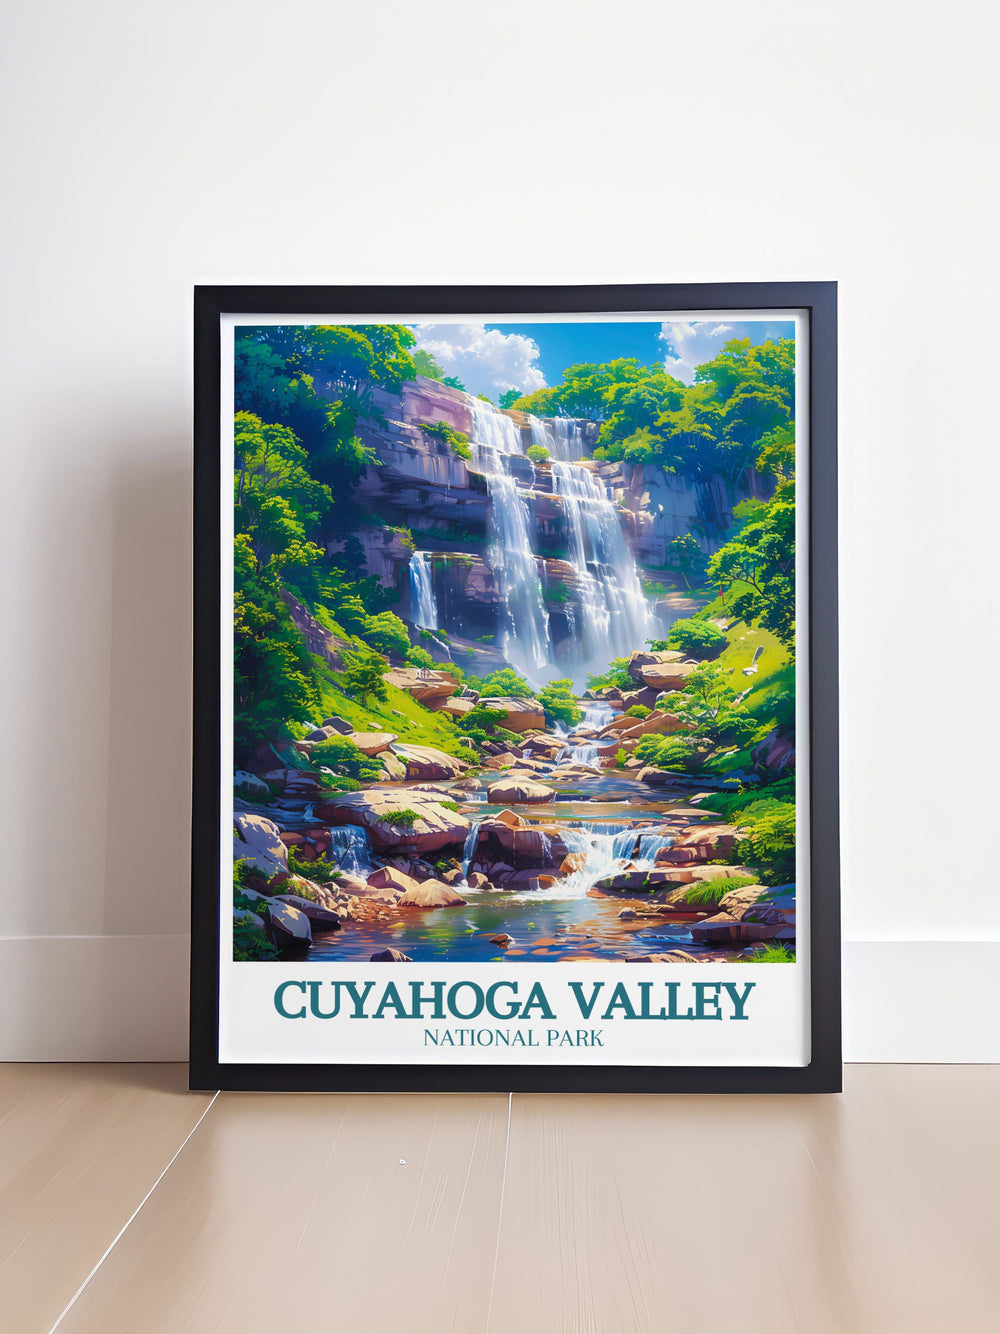 High quality art print of Cuyahoga Valley National Park, showcasing its lush forests and scenic waterways, perfect for nature lovers and home decor enthusiasts.